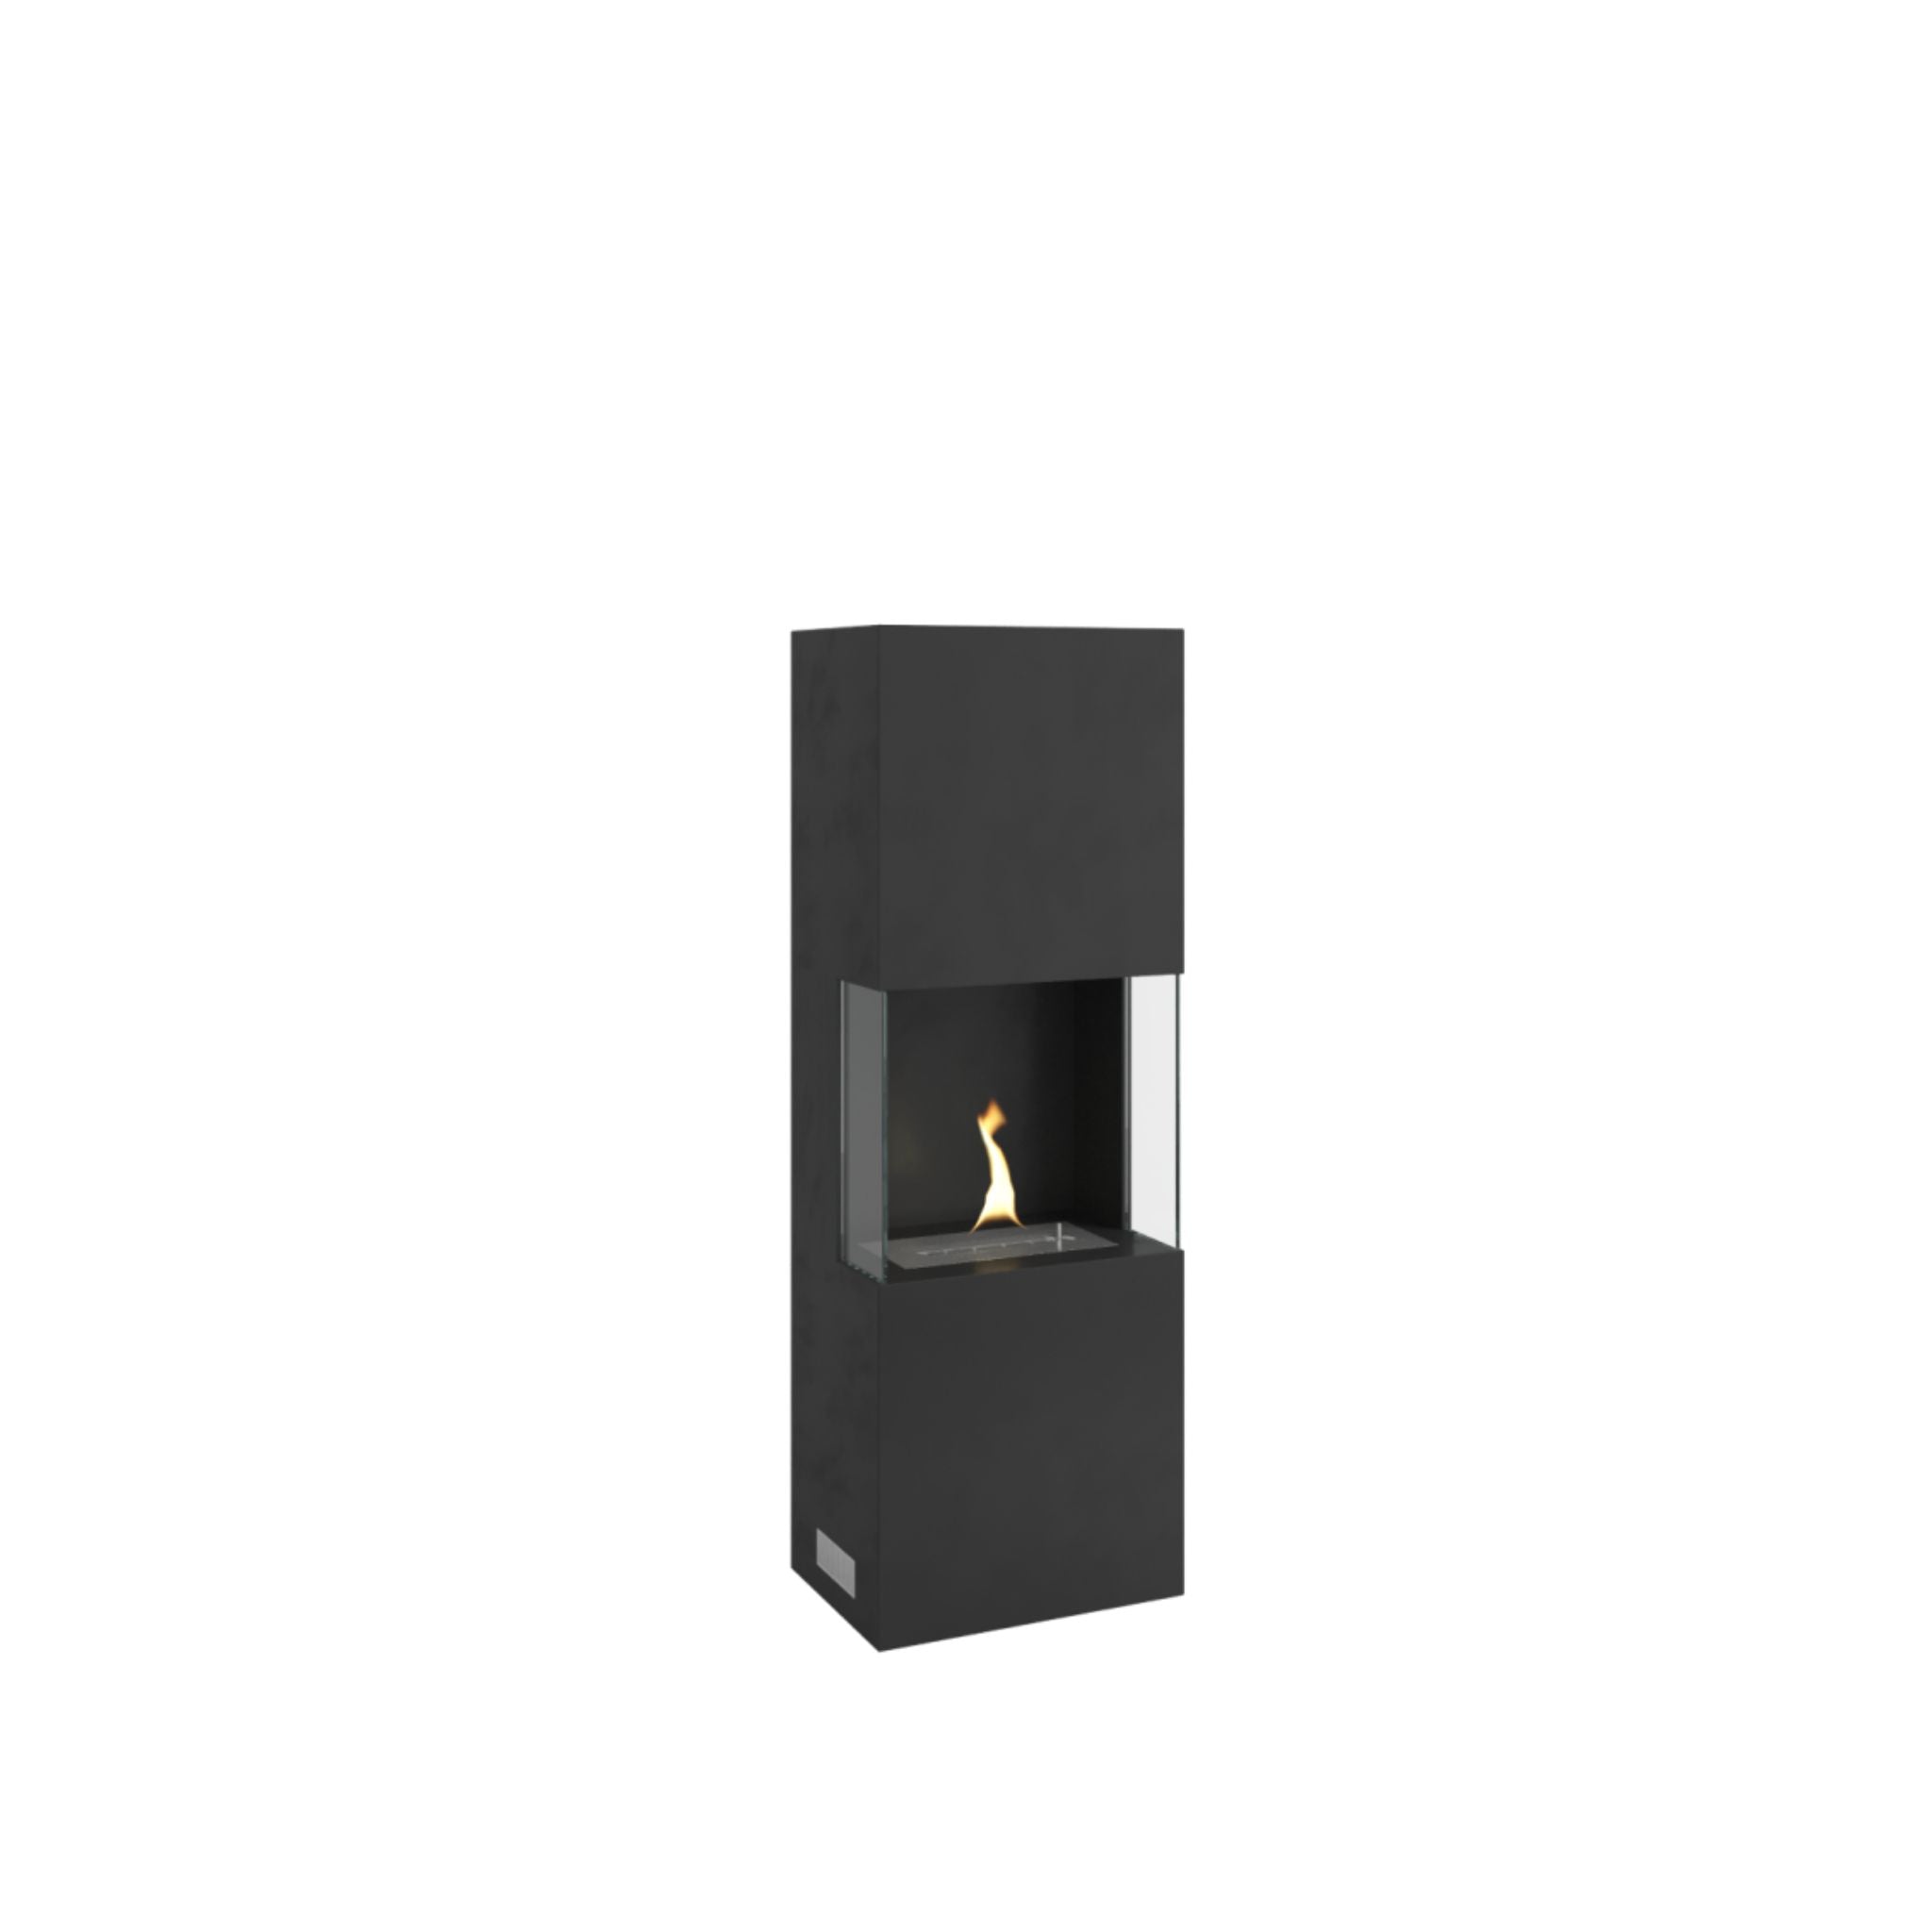 Indie freestanding fireplace